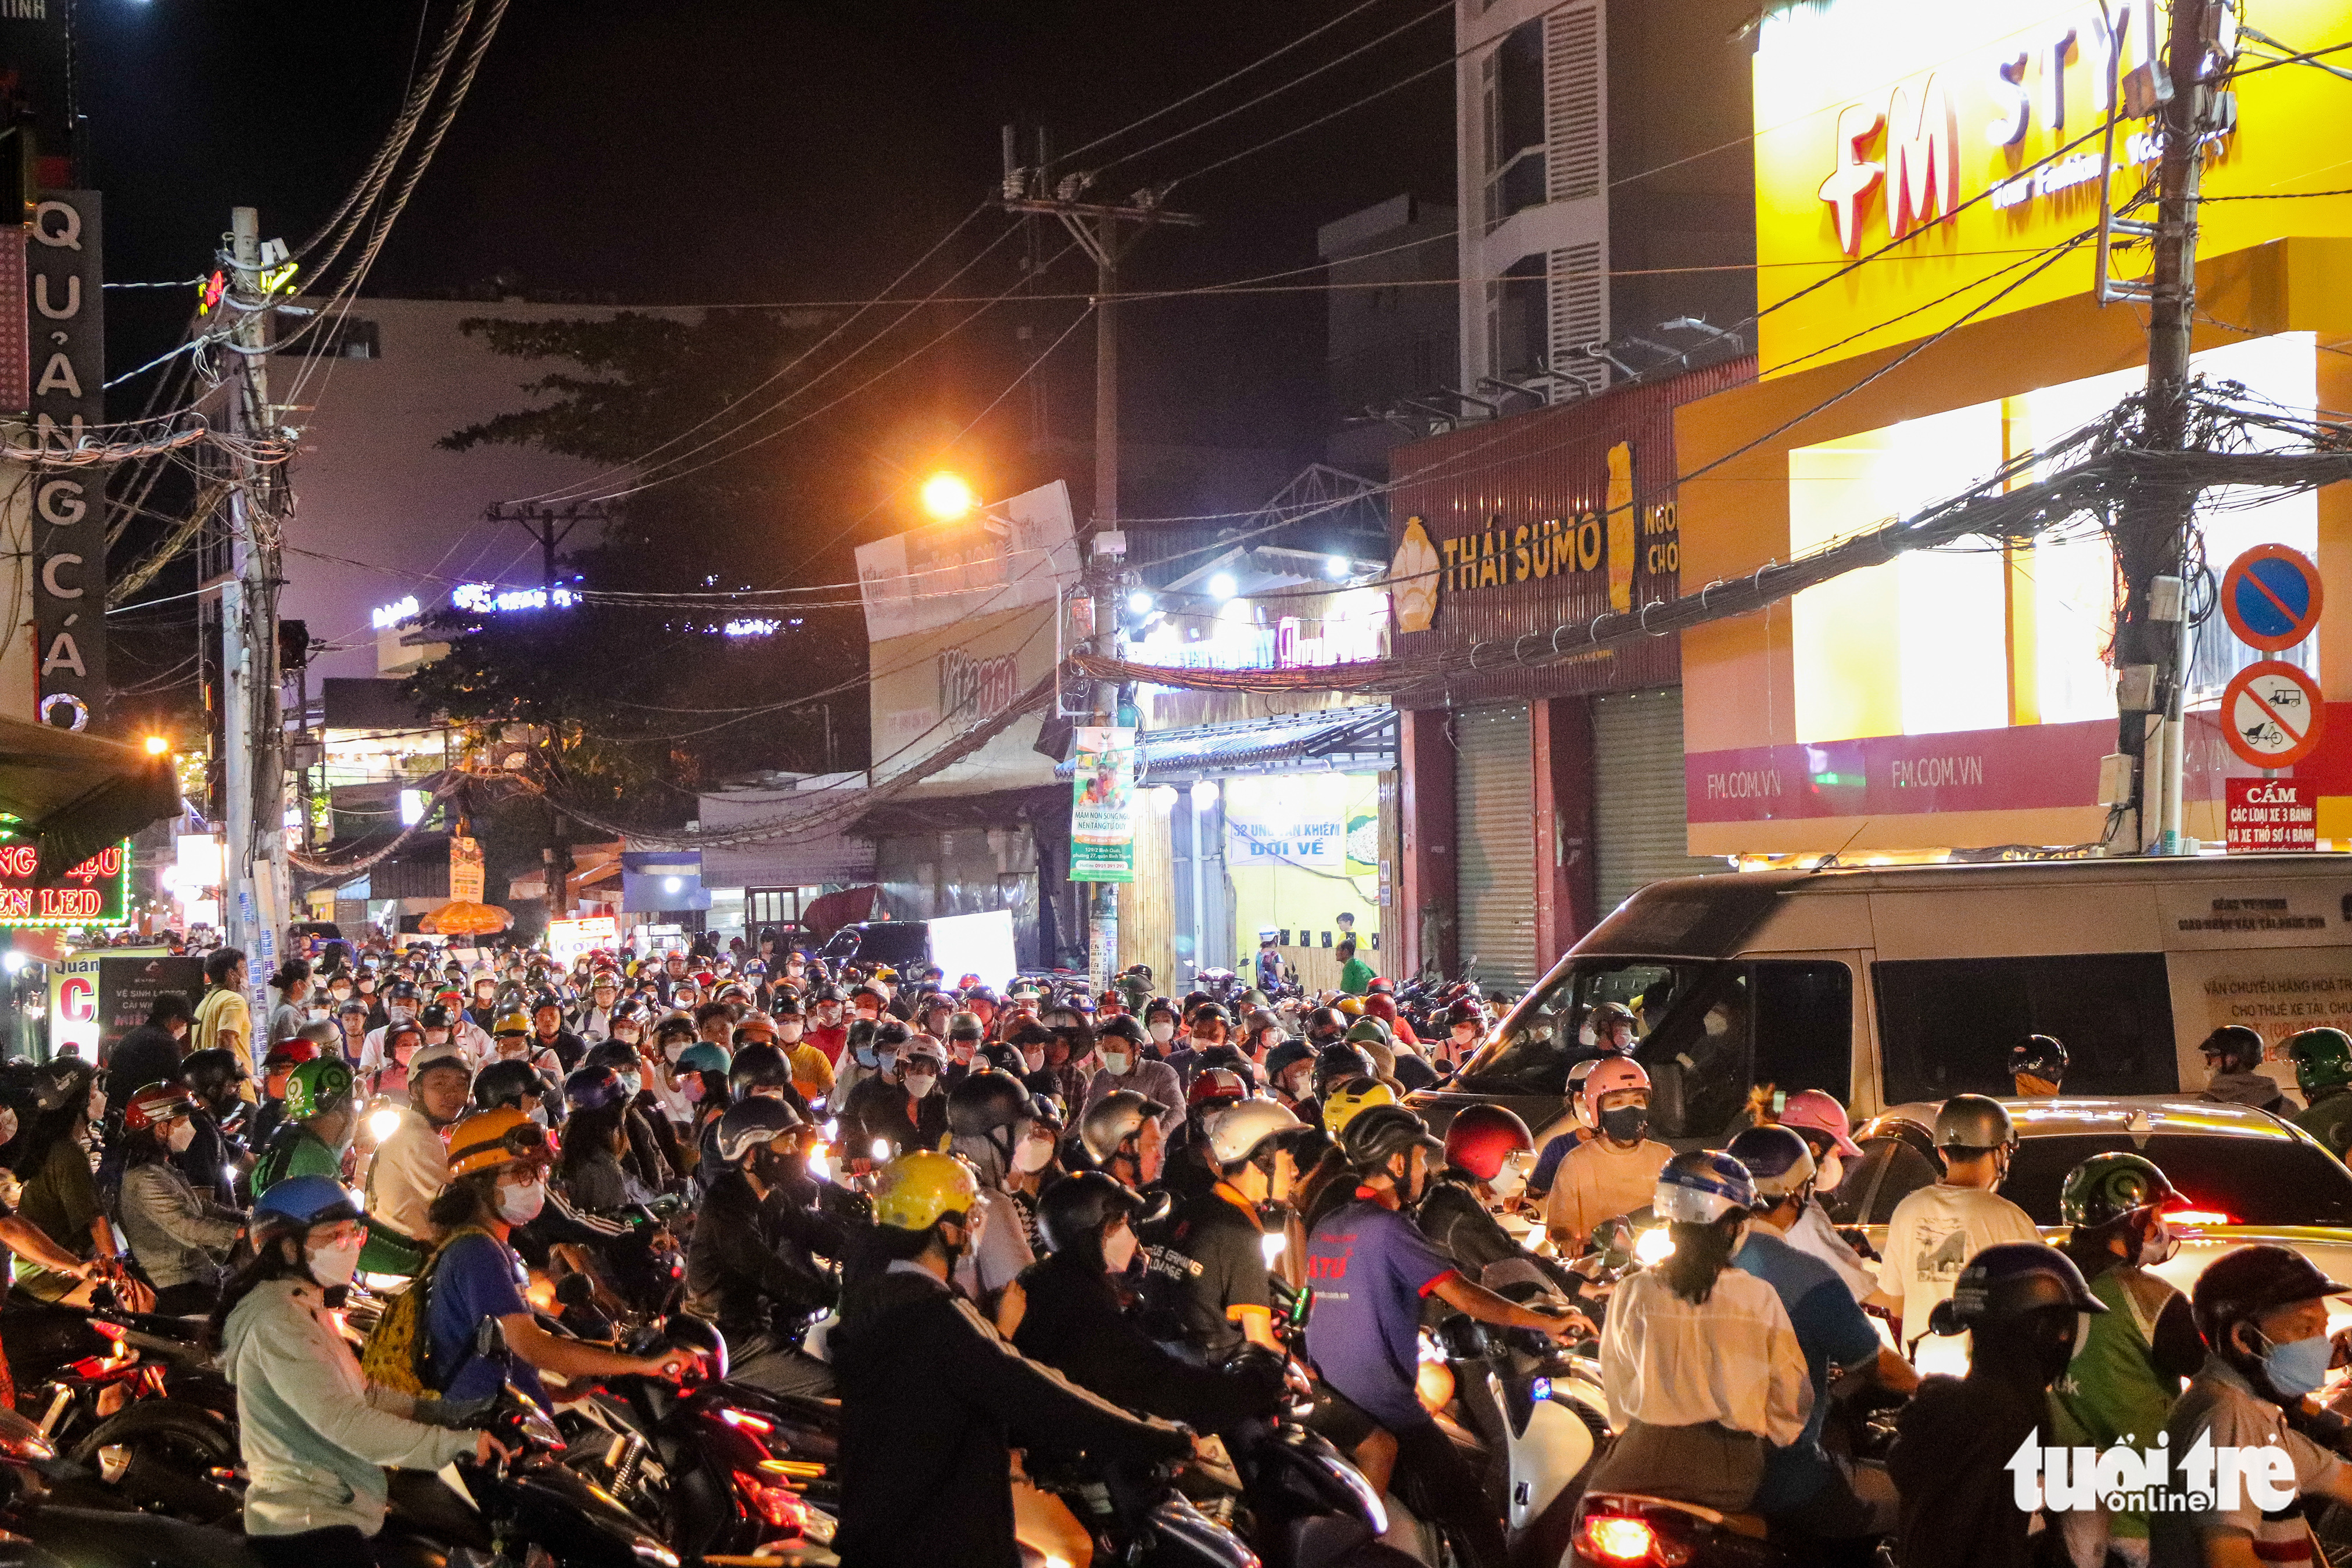 Faulty traffic light causes massive congestion in Ho Chi Minh City